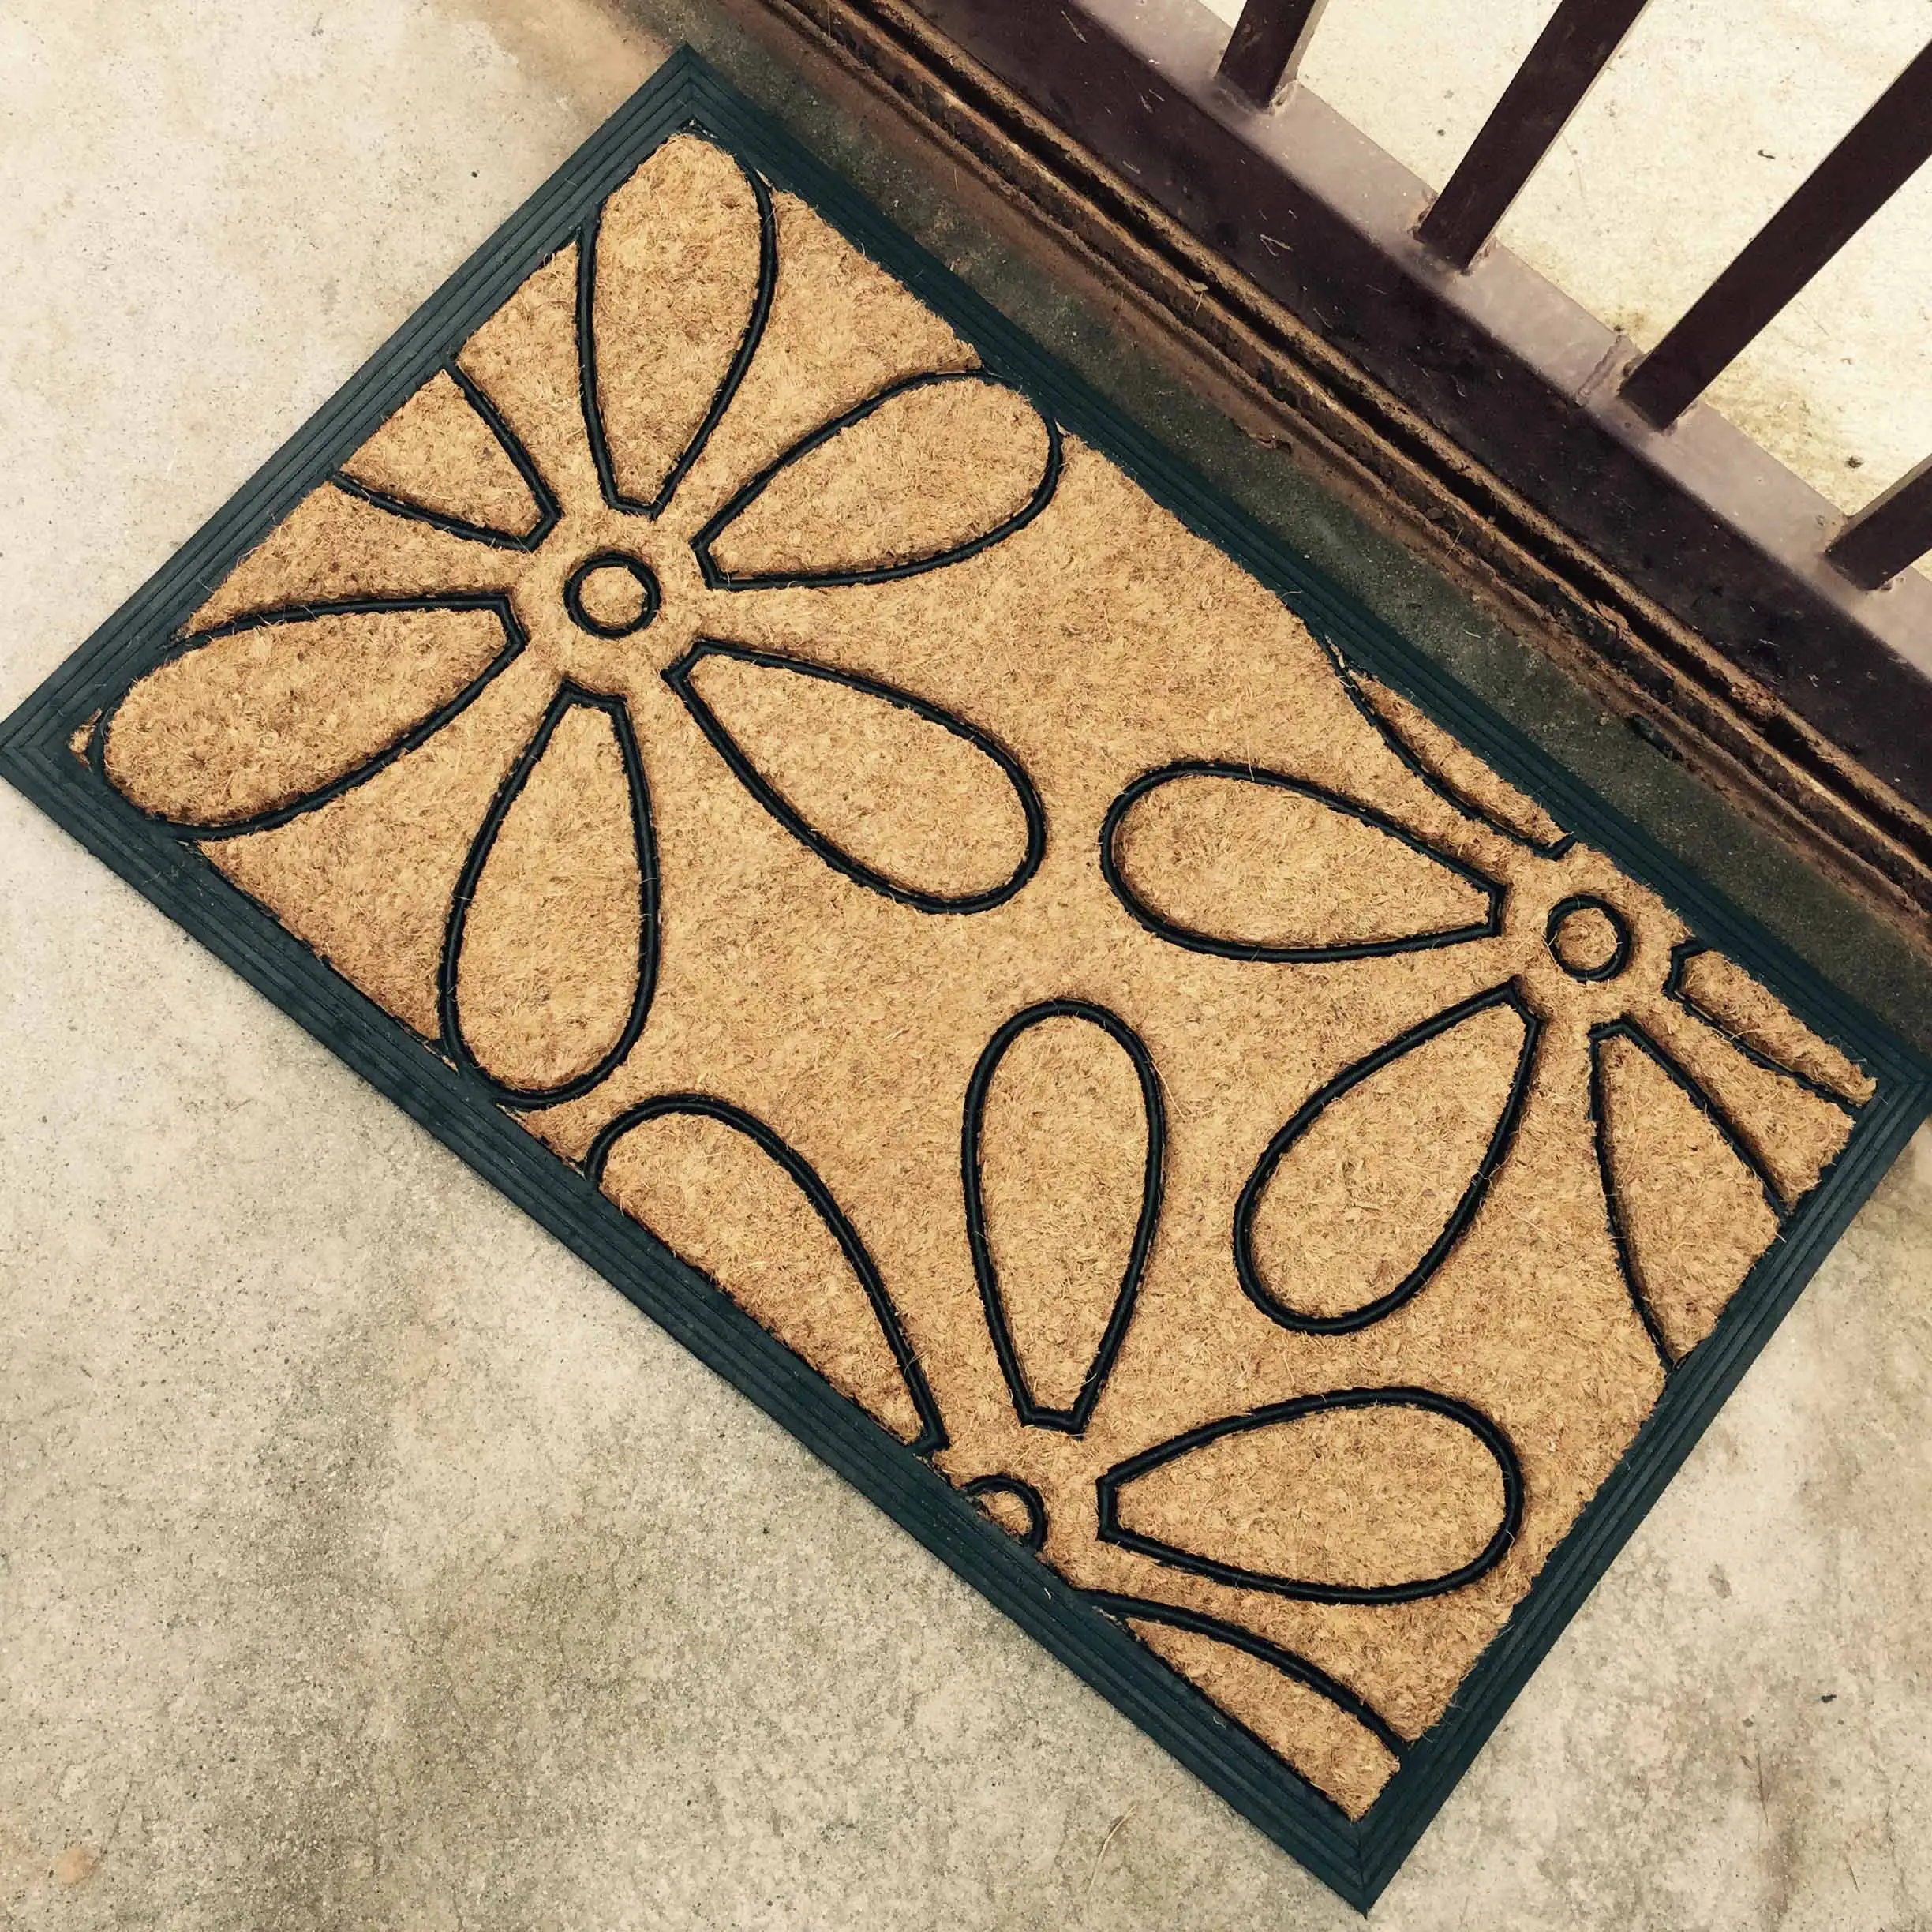 30 in. x 18 in. Natural Brushed Rubber Backed Coir Door Mat